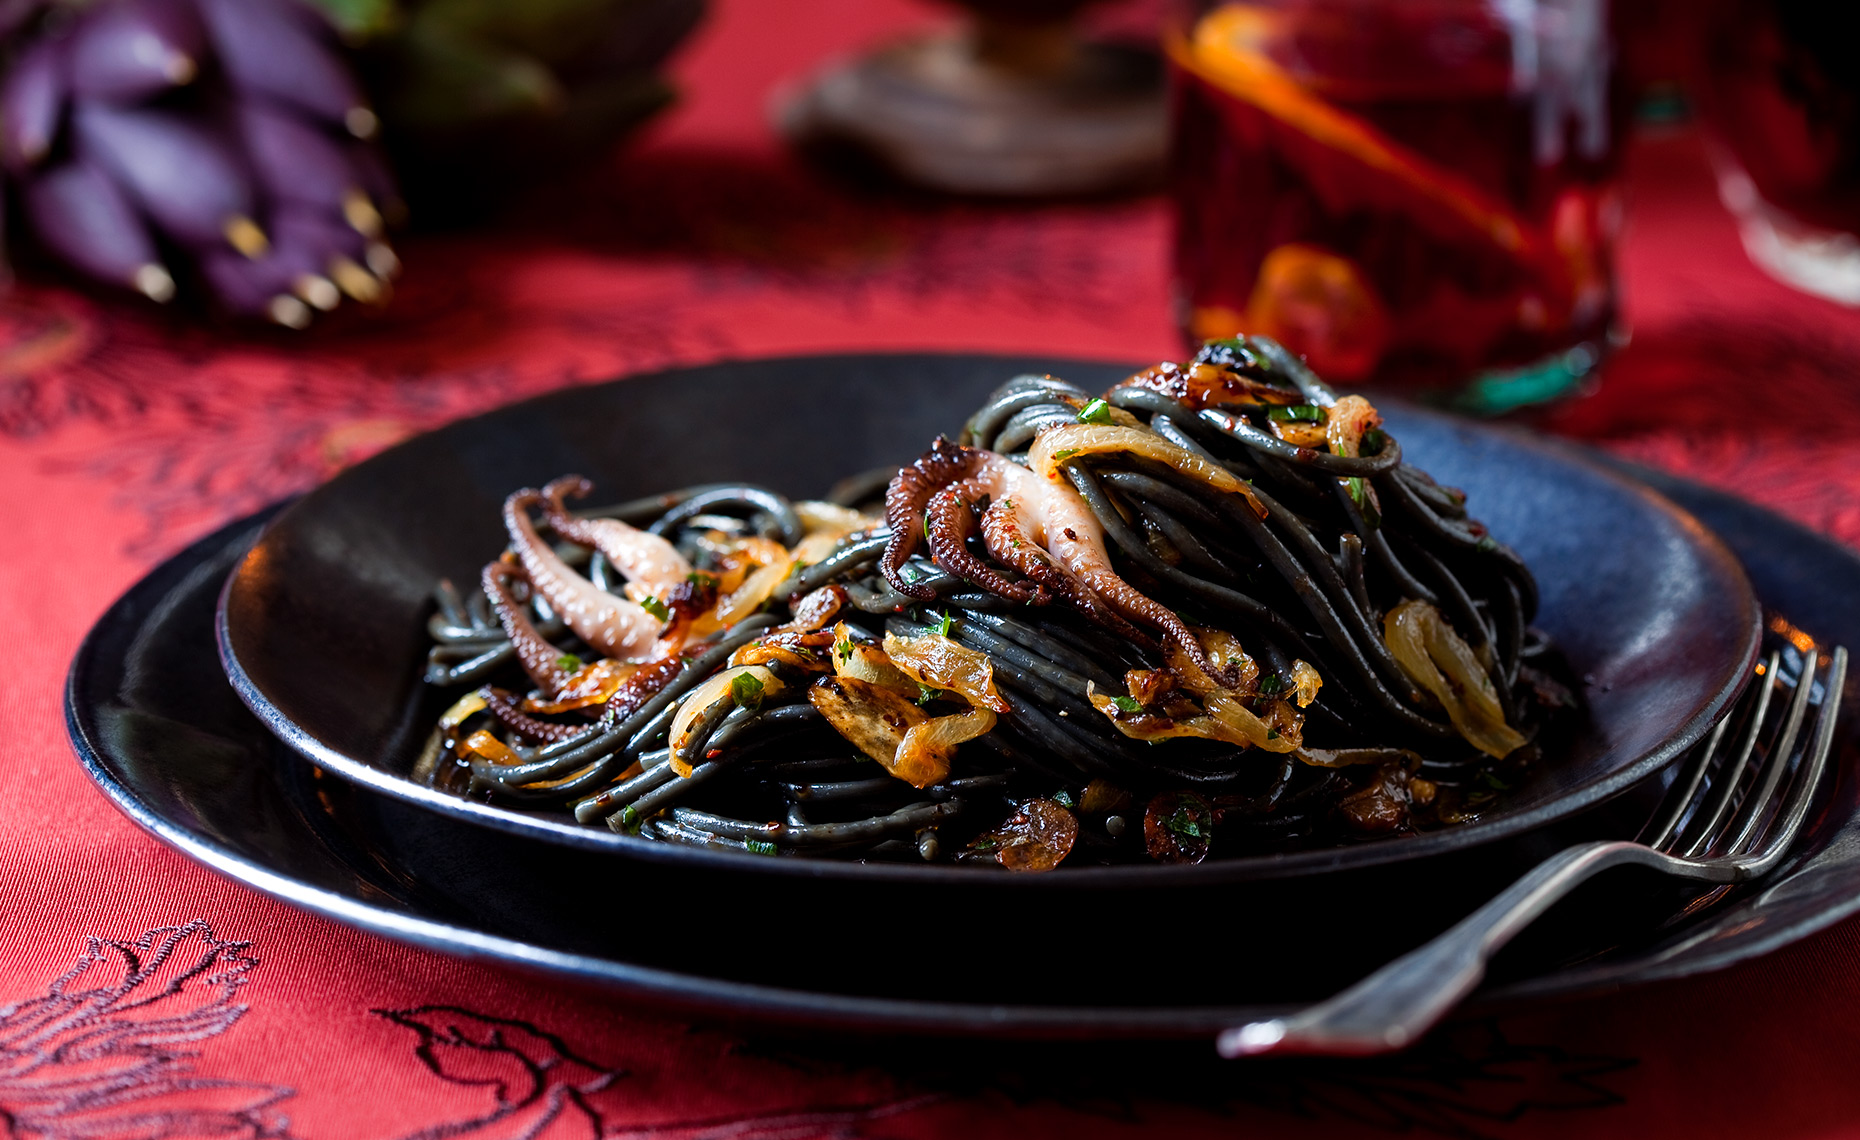 Squid ink pasta with octopus and spicy tomato sauce